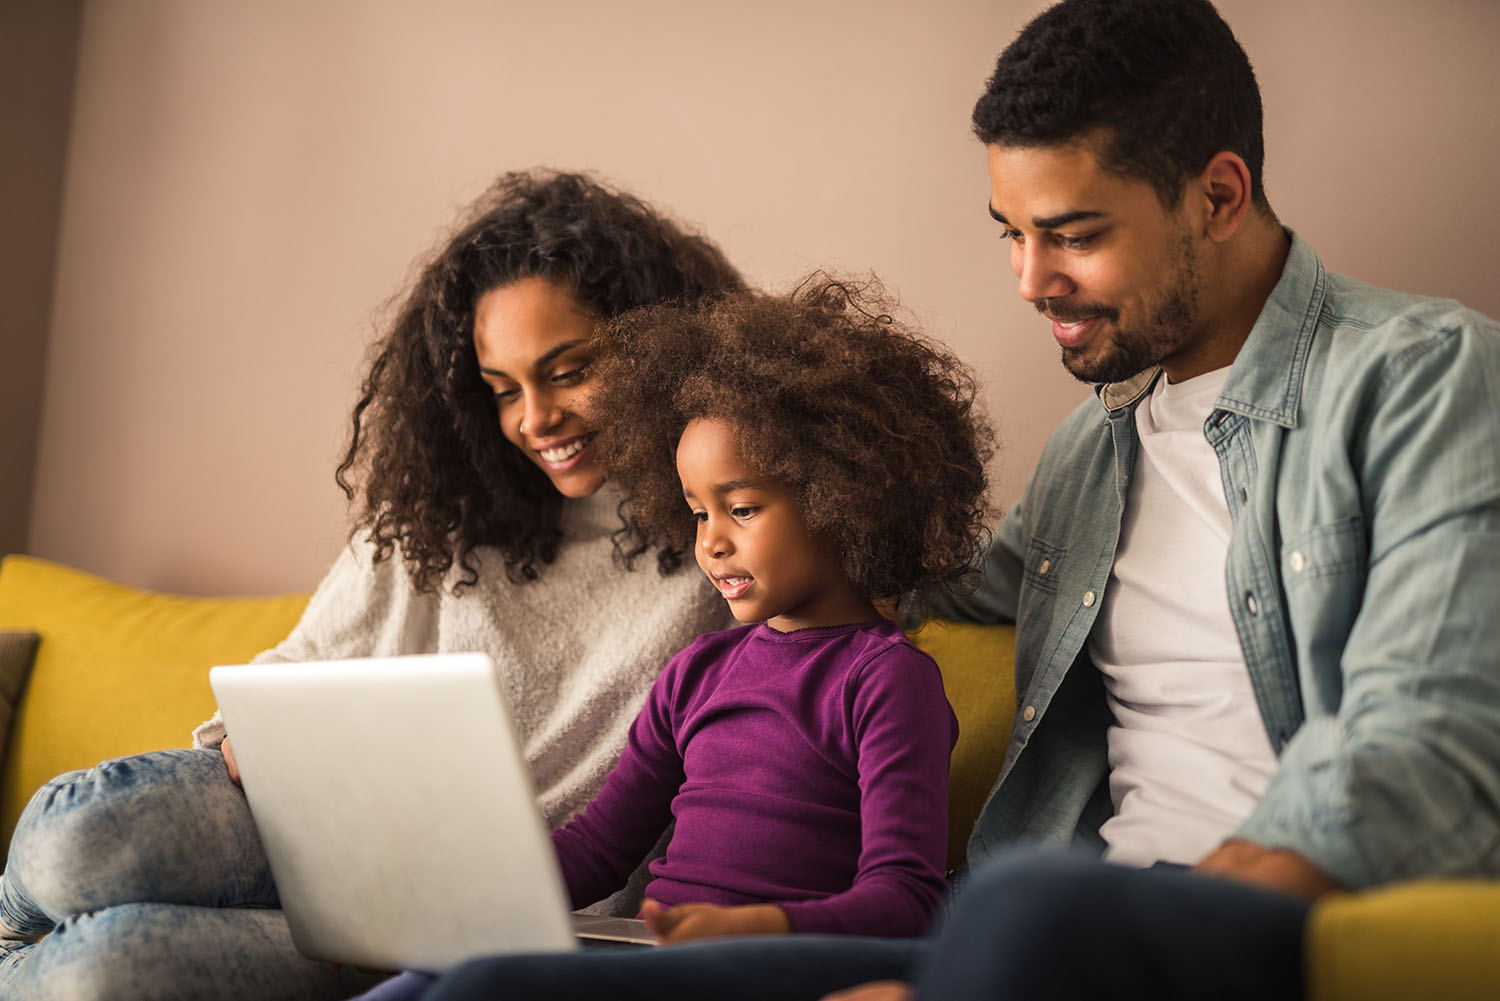 A couple sits with their child on a couch. Everybody is looking at a laptop screen.